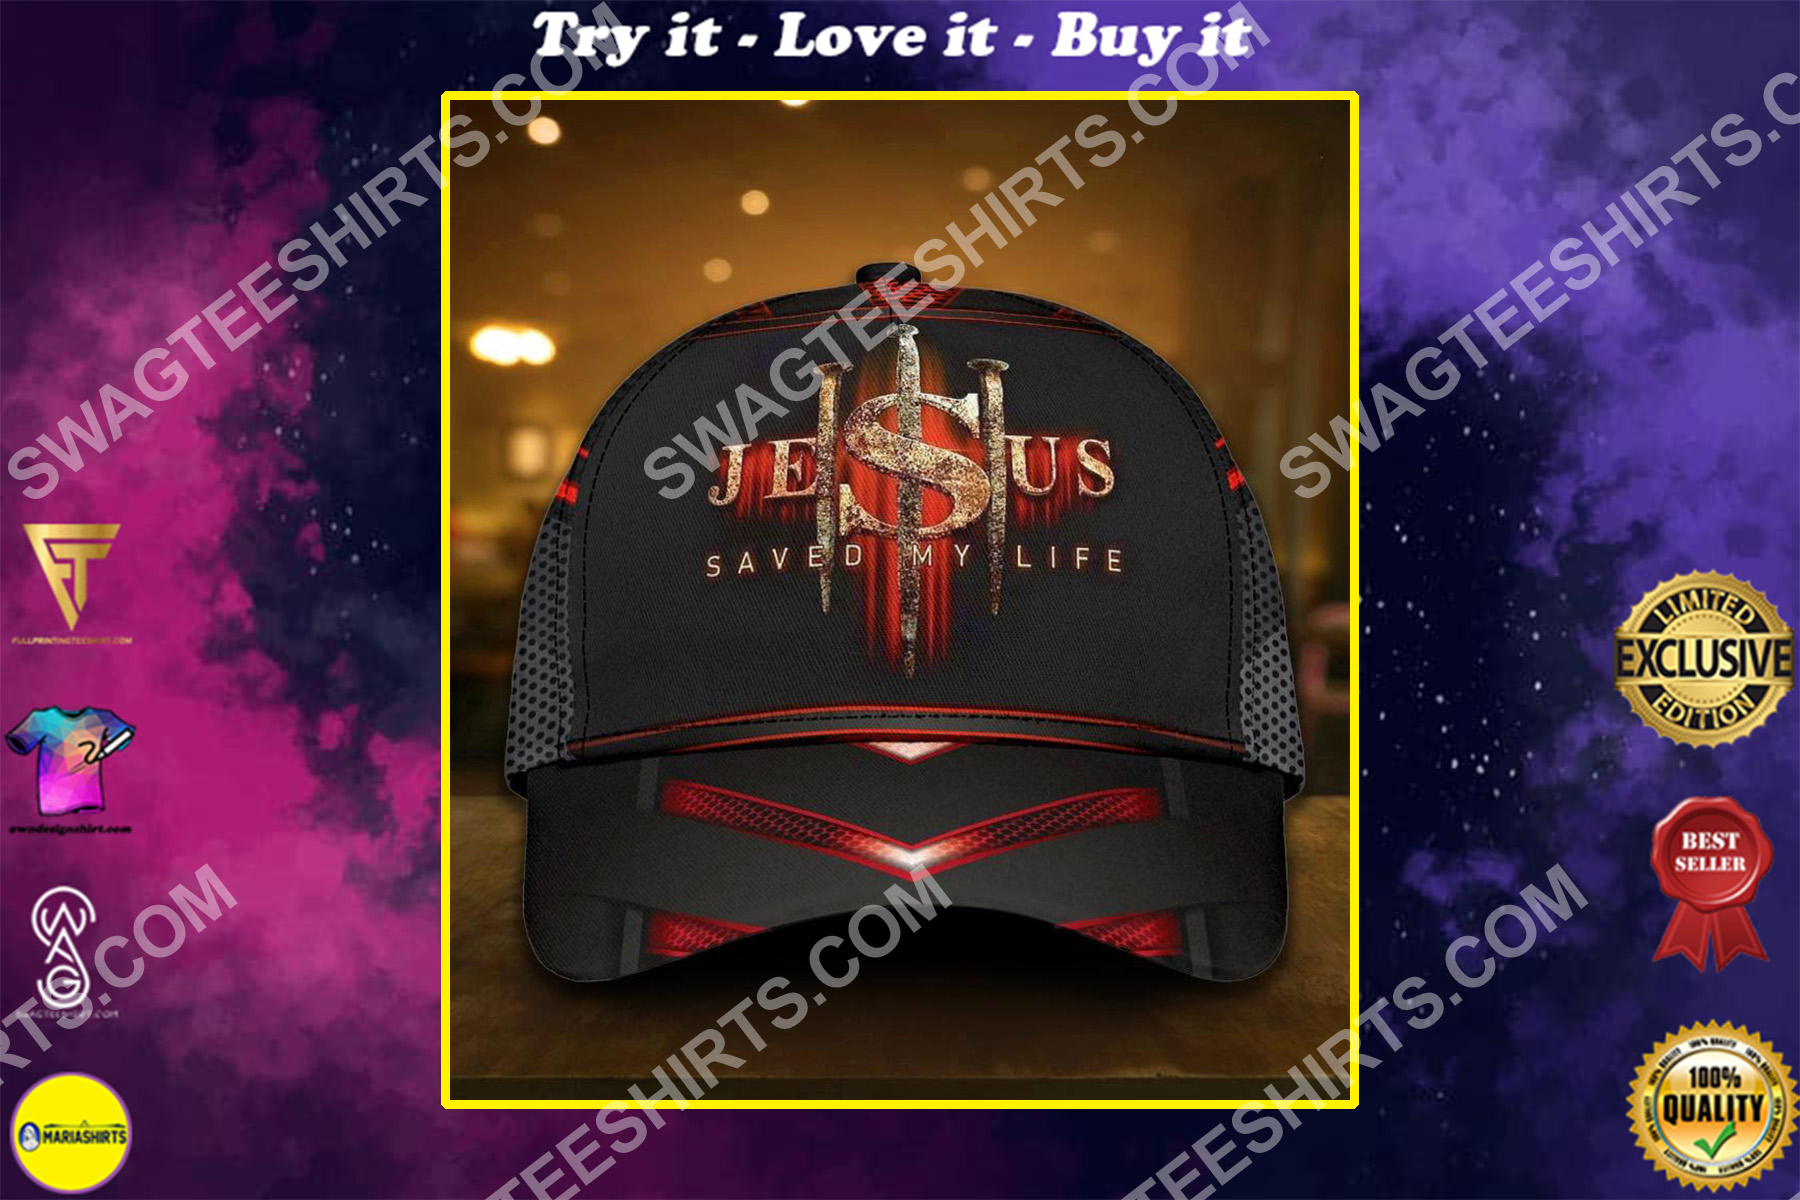 Jesus saved my life all over print classic cap